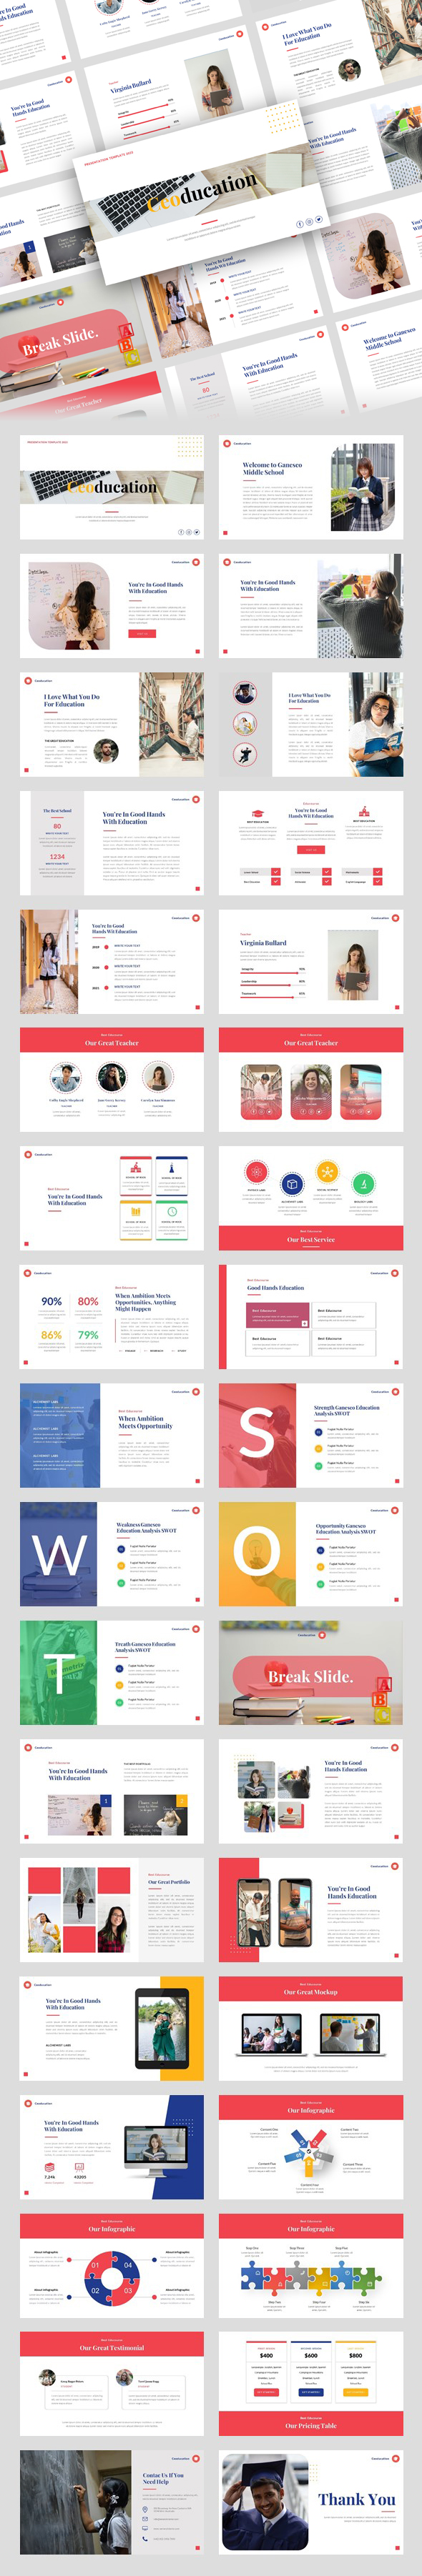 [DOWNLOAD]Ceoducation – Education & Learning Google Slides Template